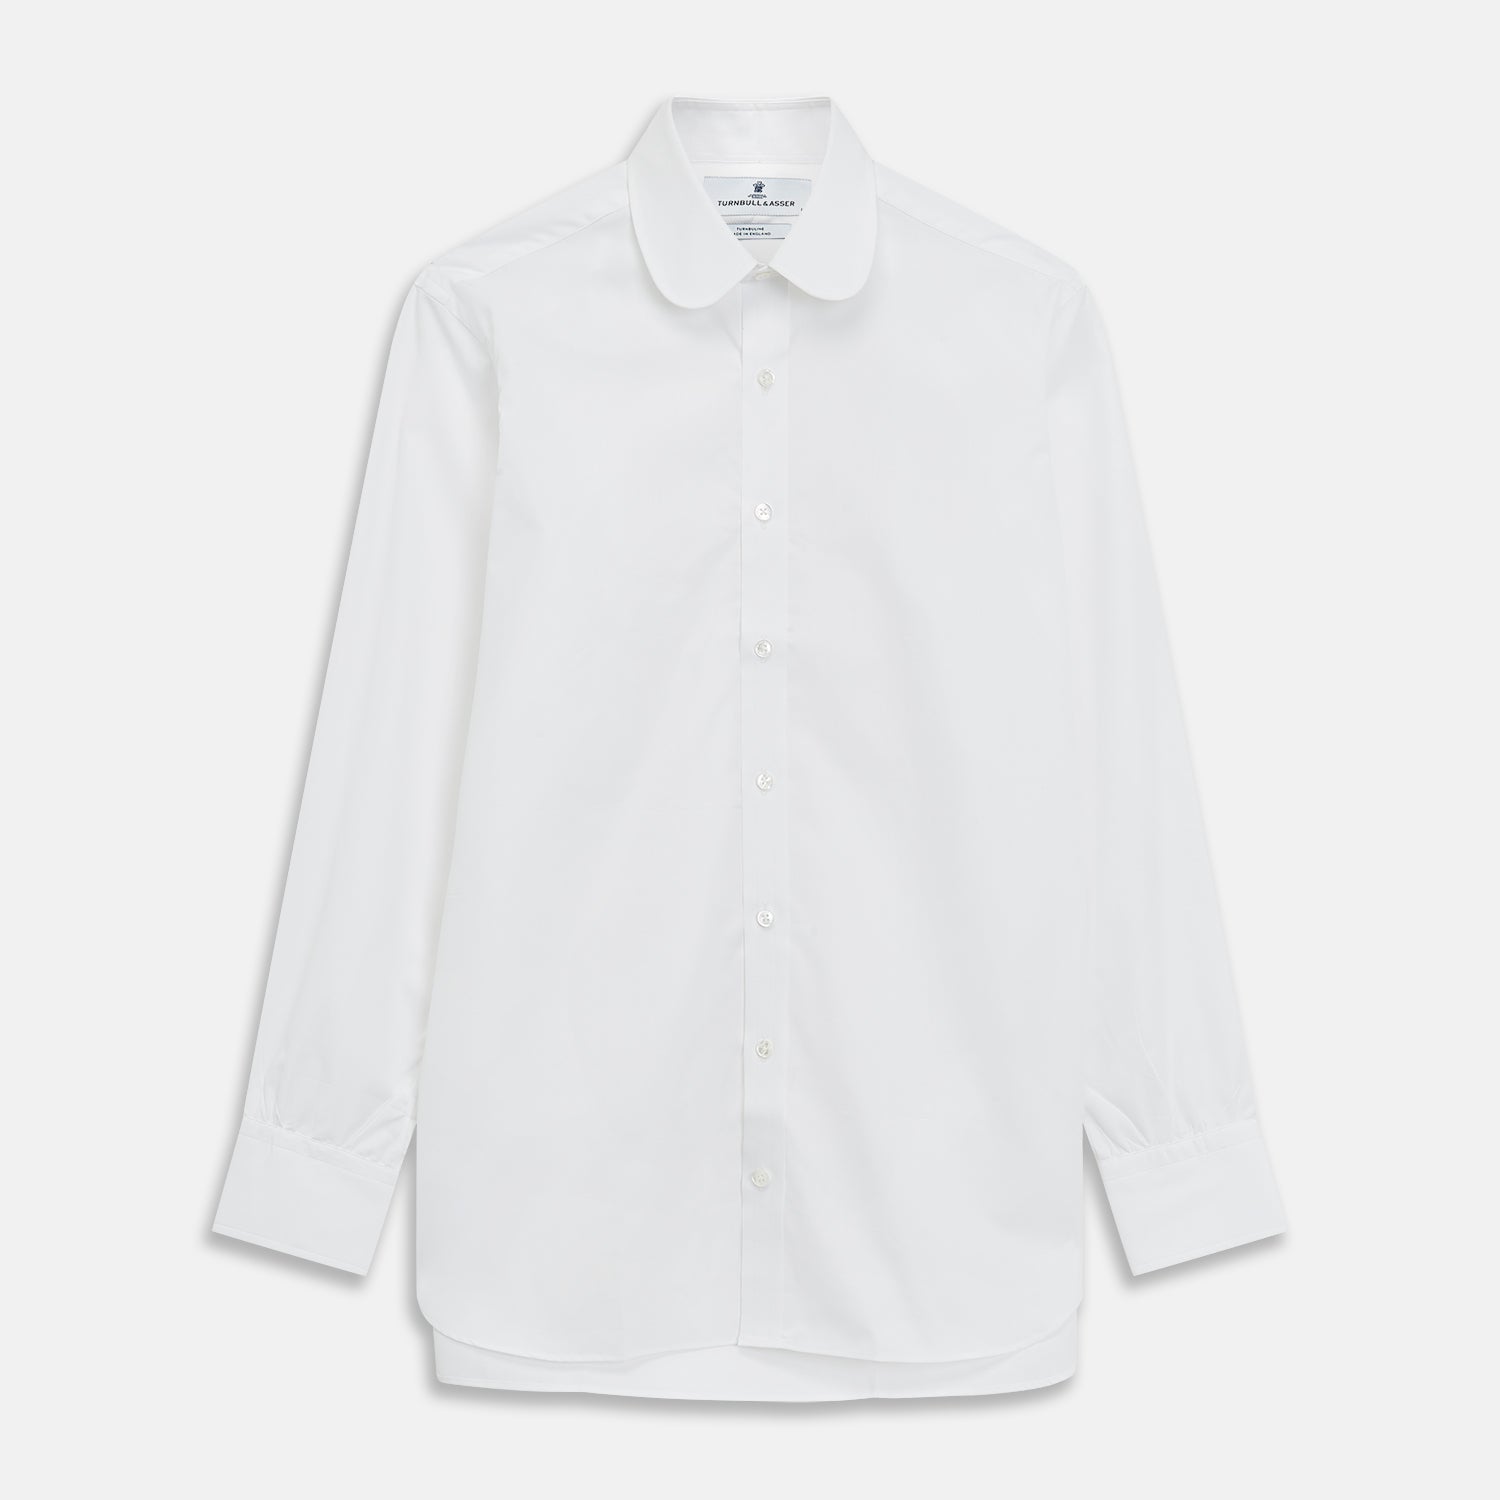 Plain White Regular Fit Cotton Shirt with Round Collar and 3-Button Cuffs